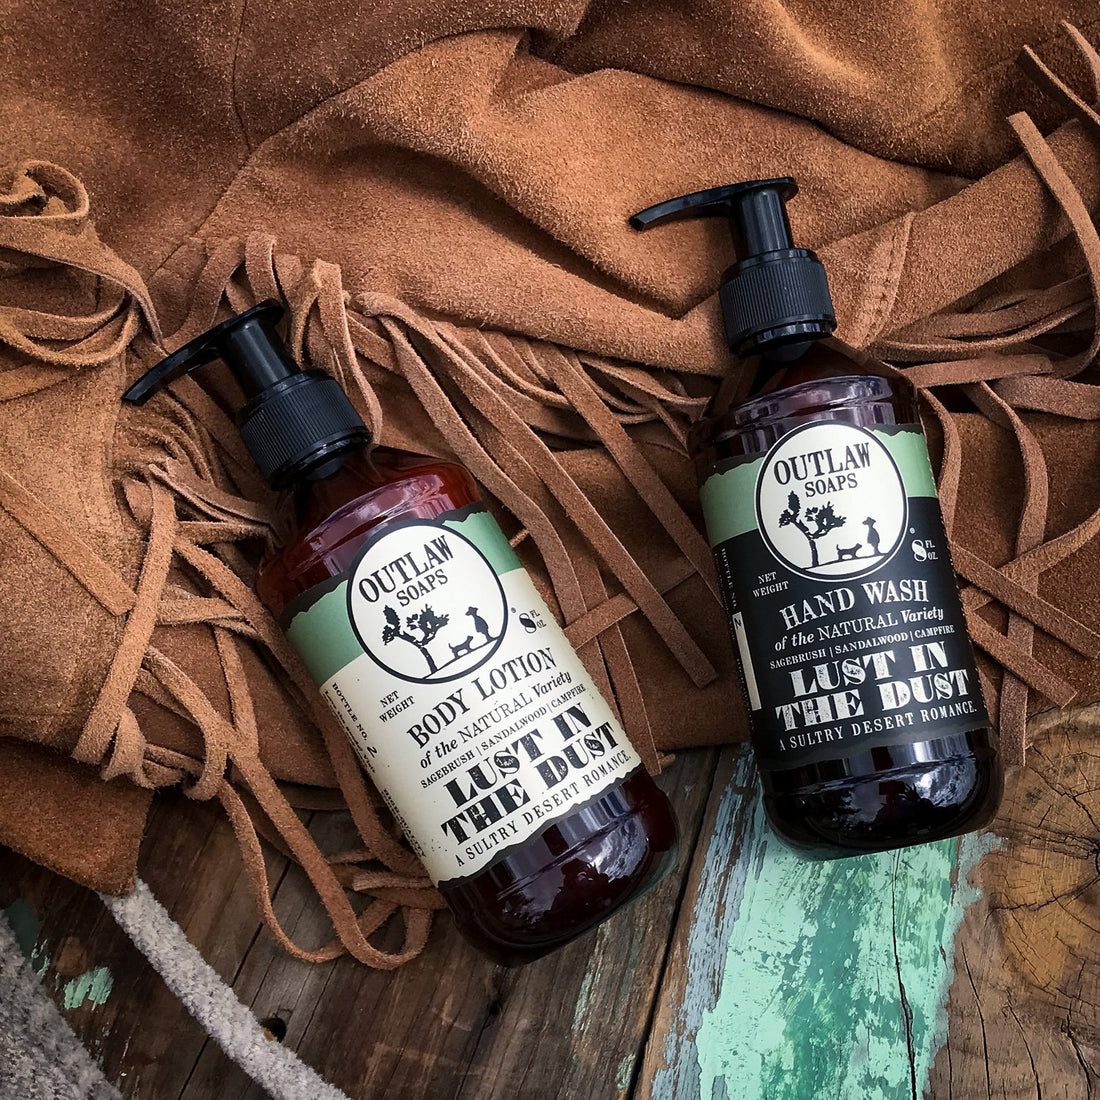 Ruggedly badass lotion inspired by the outdoors: Lust in the Dust and Mountain Hideout Natural Lotion